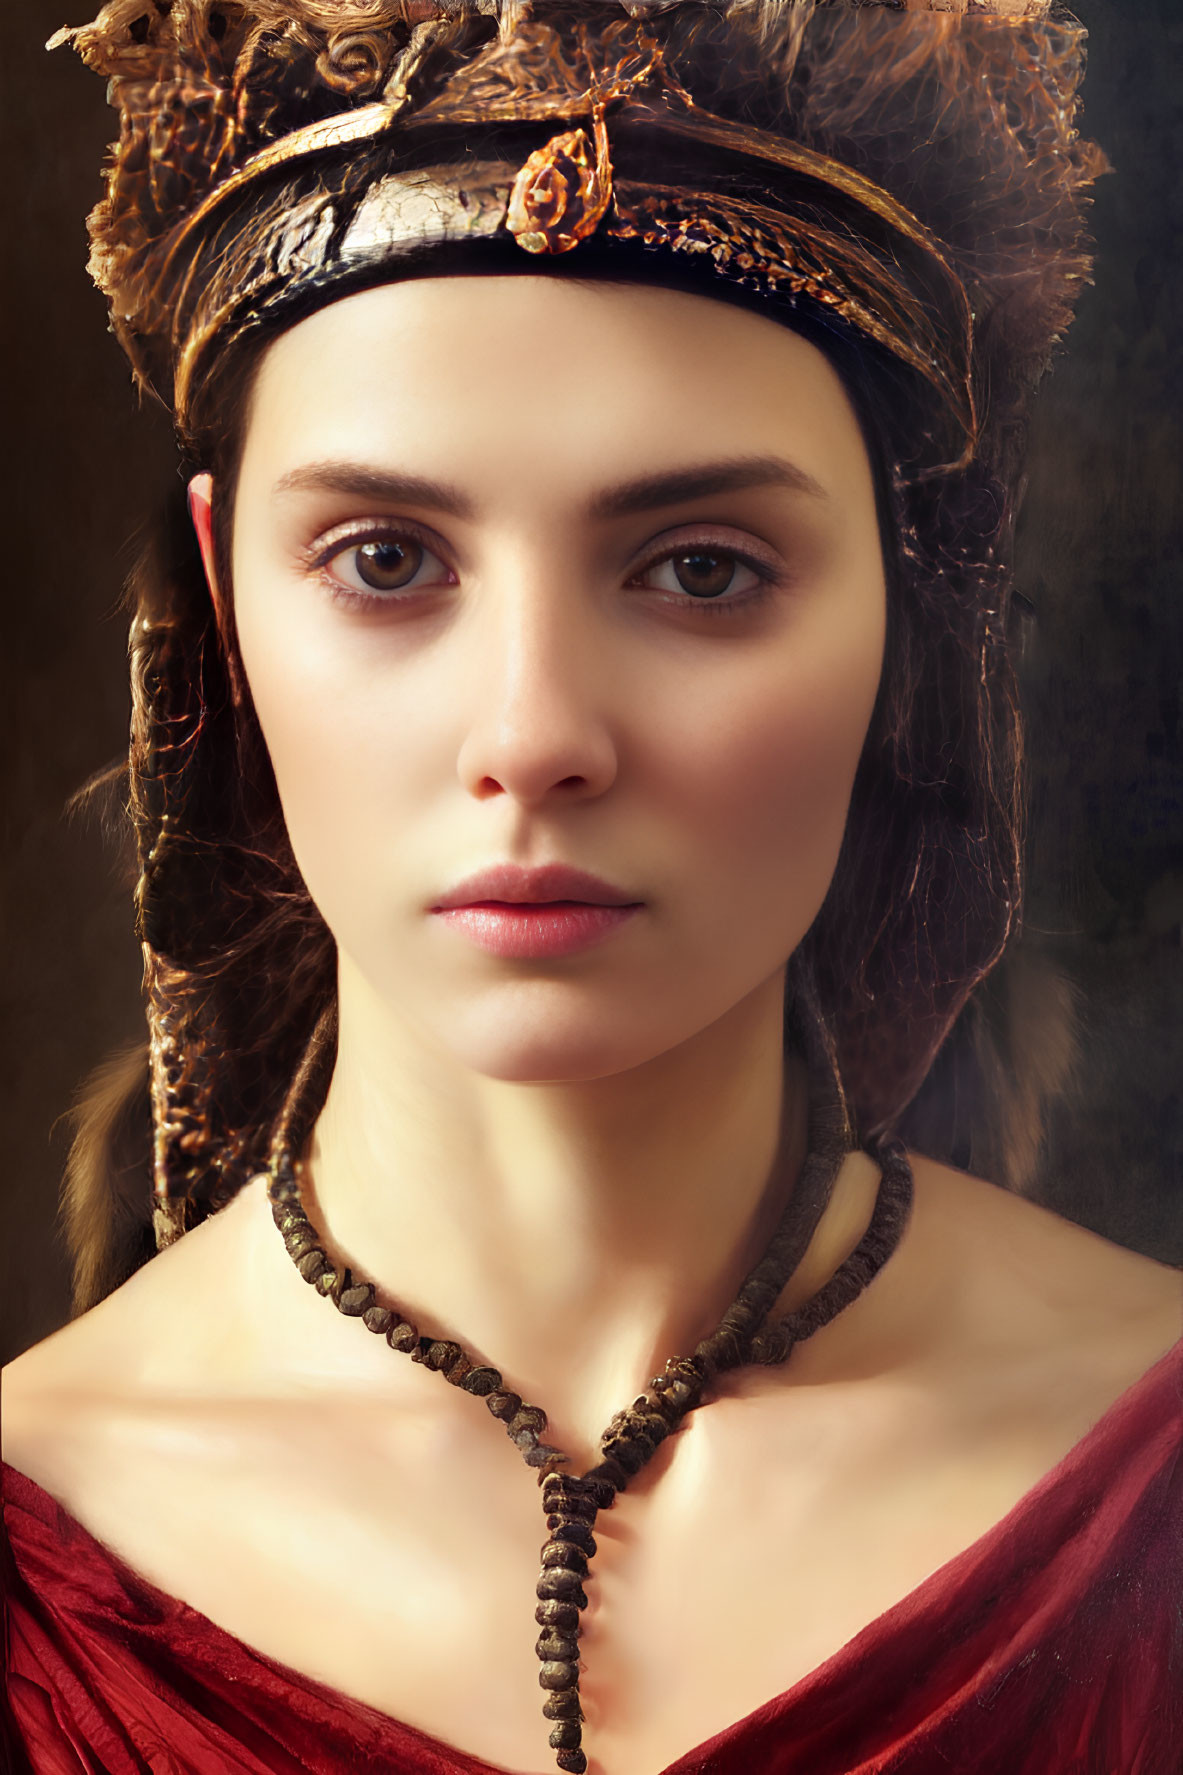 Regal woman portrait with decorative headband and red draped garment